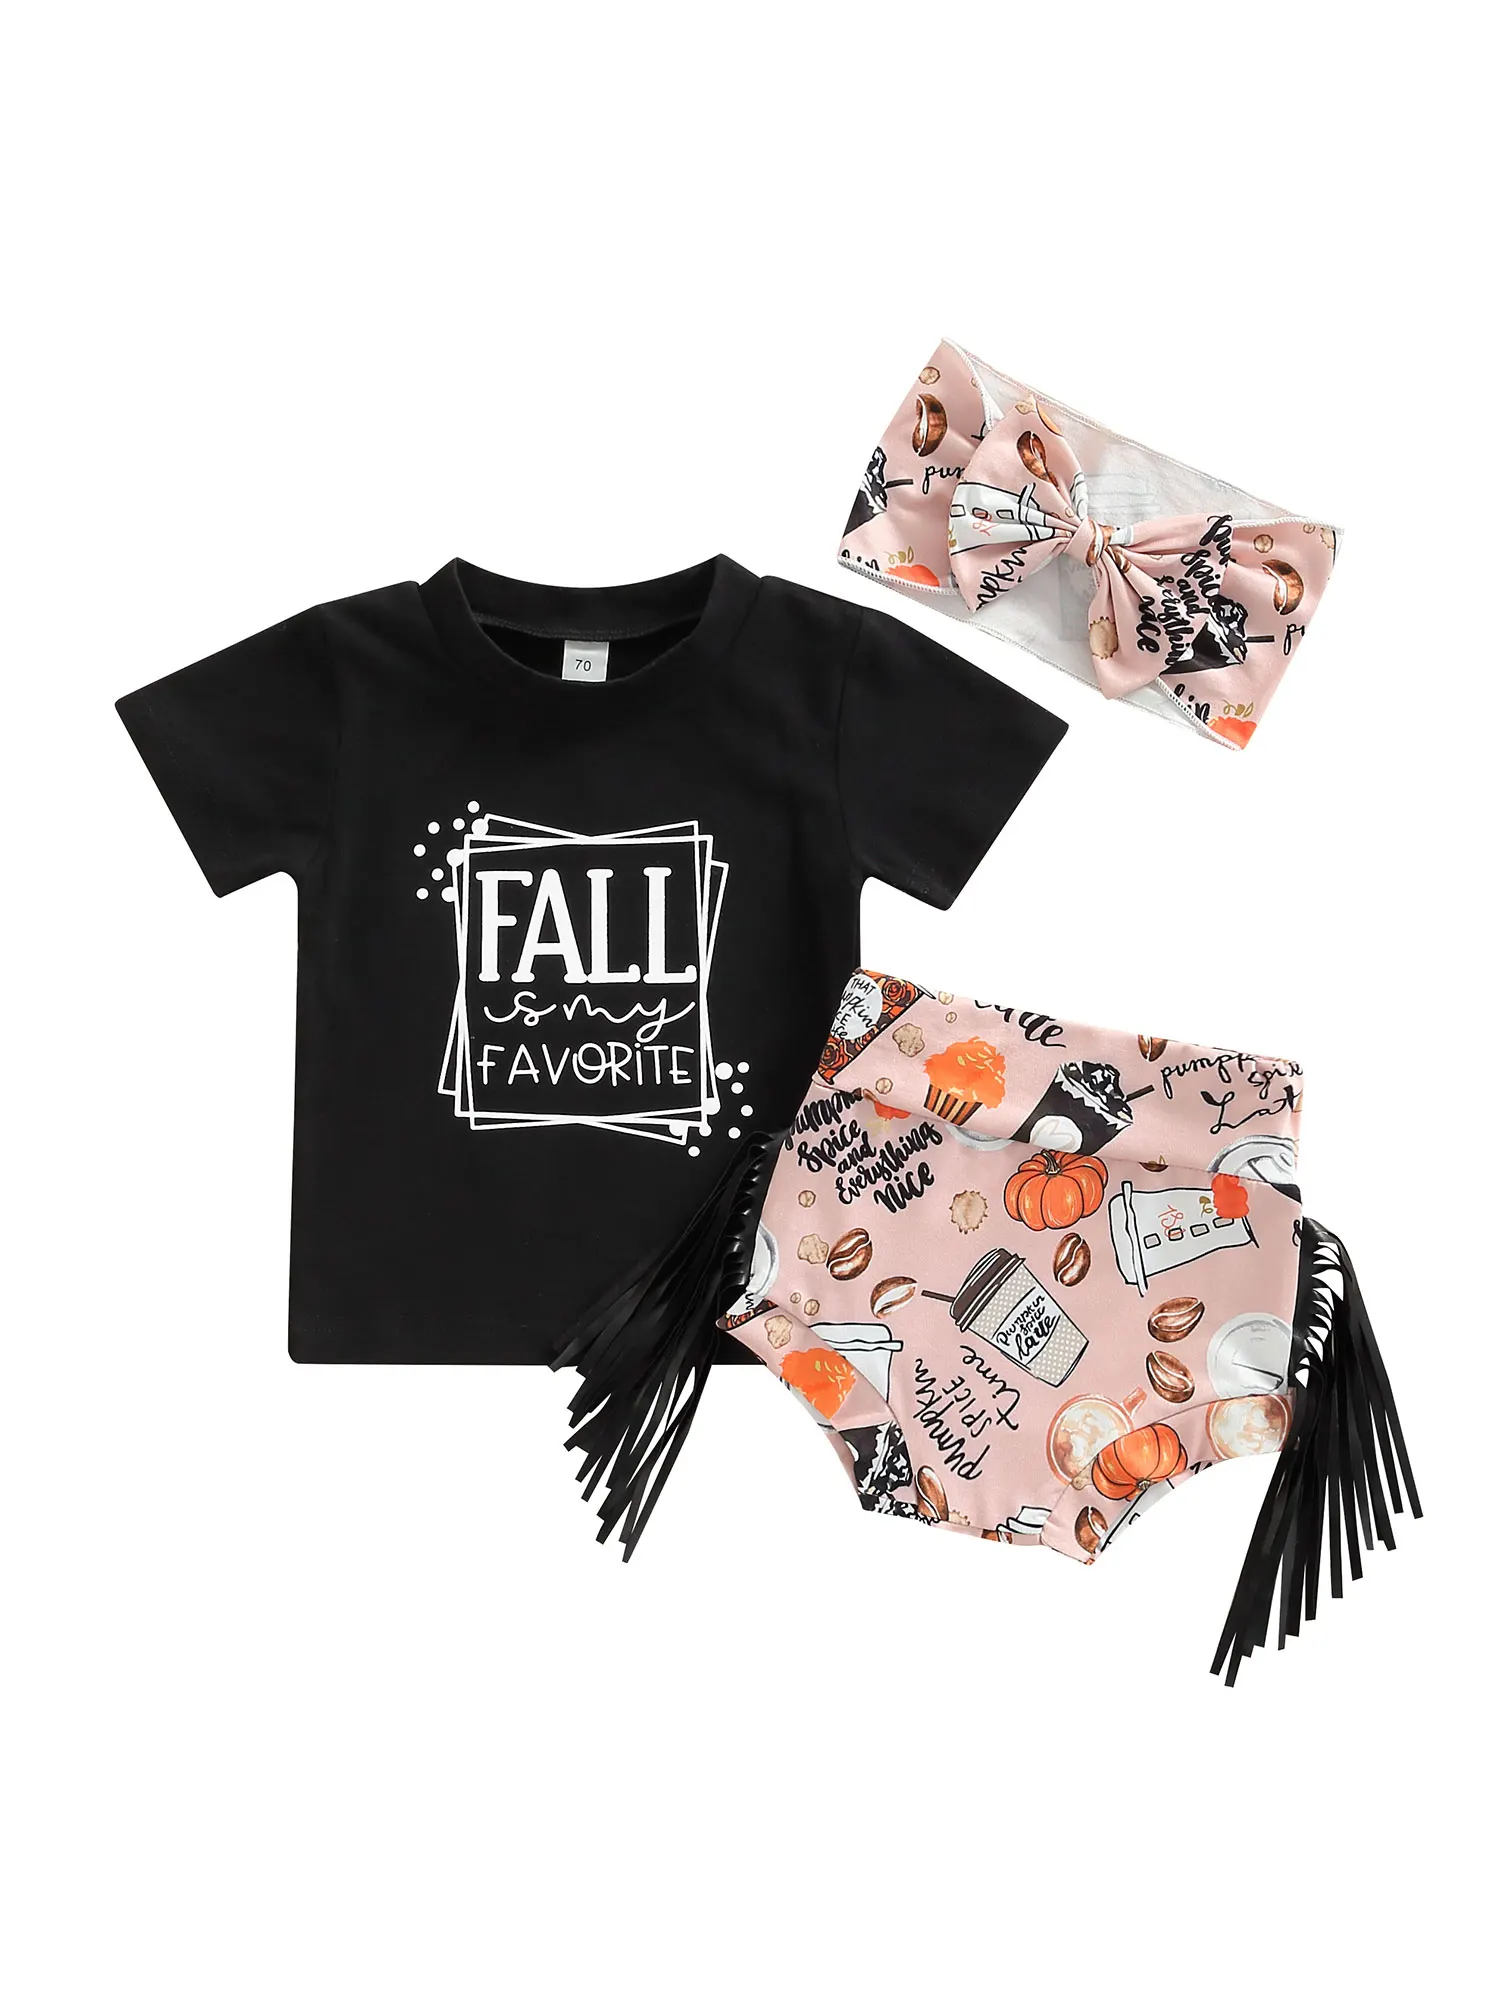 

3Pcs Halloween Baby Girls Outfit Toddlers Letter Round Collar Short Sleeve Tops Pumpkin Printing Tassels Shorts Headwear